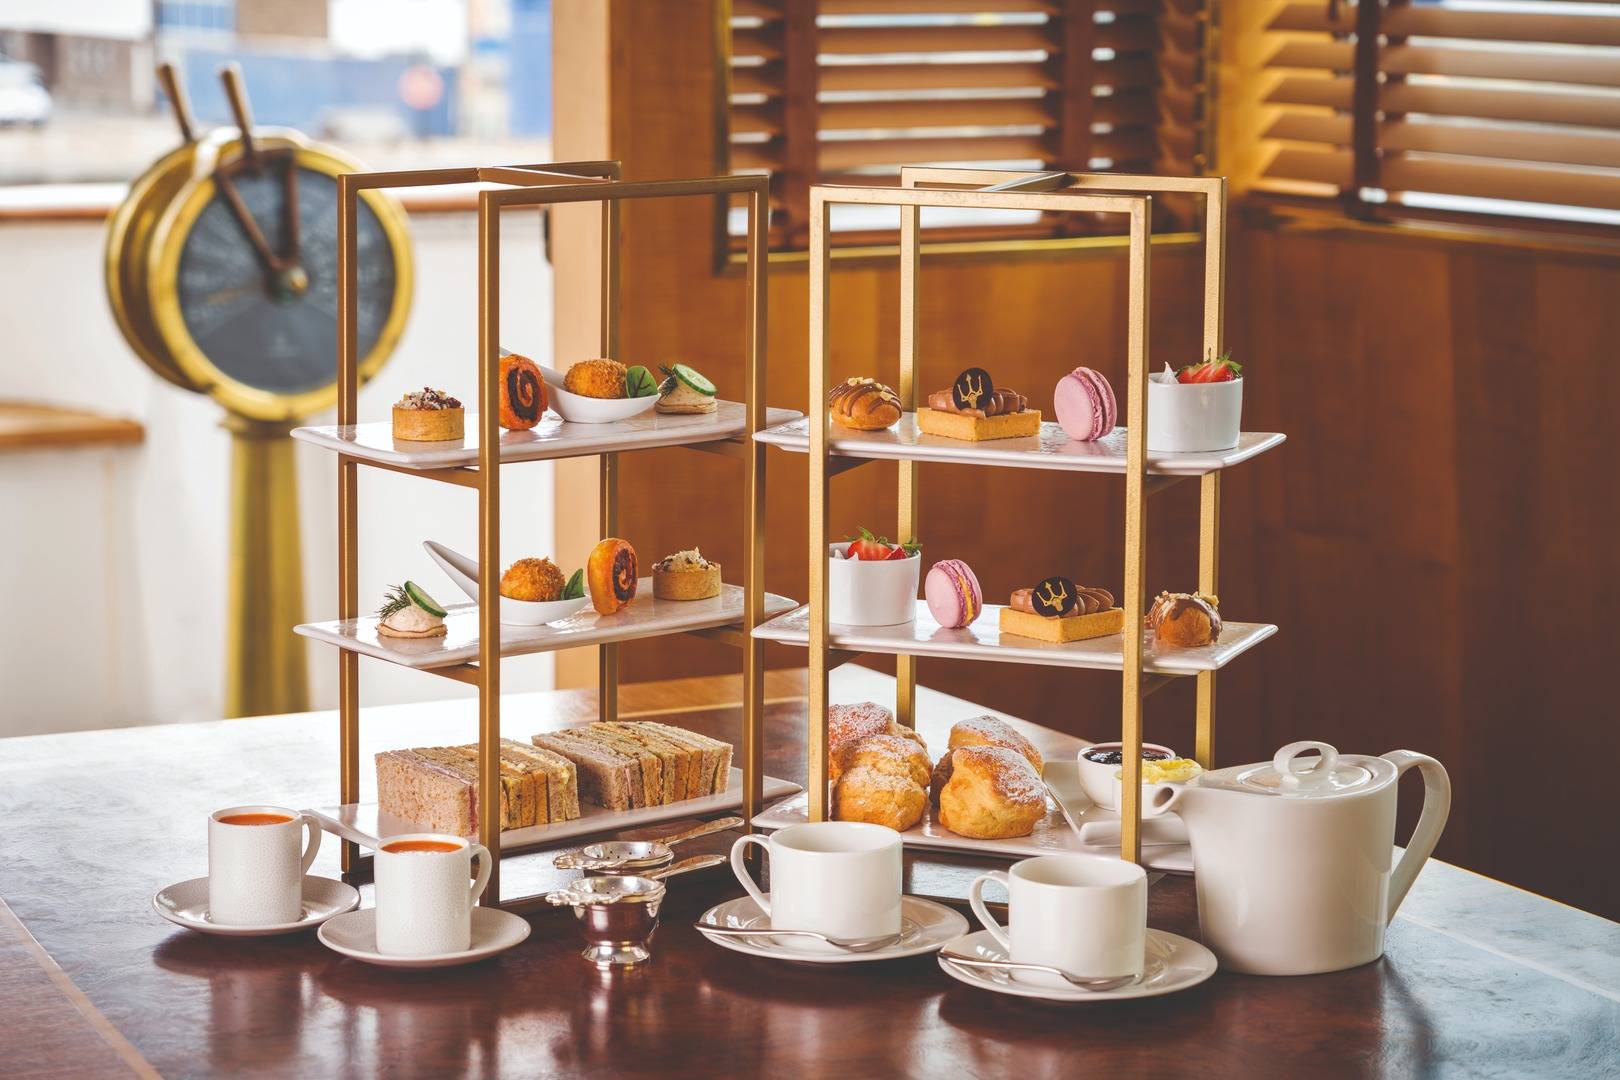 Two cake stands containing tiers of delicious sweet and savoury delicacies from Fingal's Afternoon Tea menu. , Brendan MacNeil